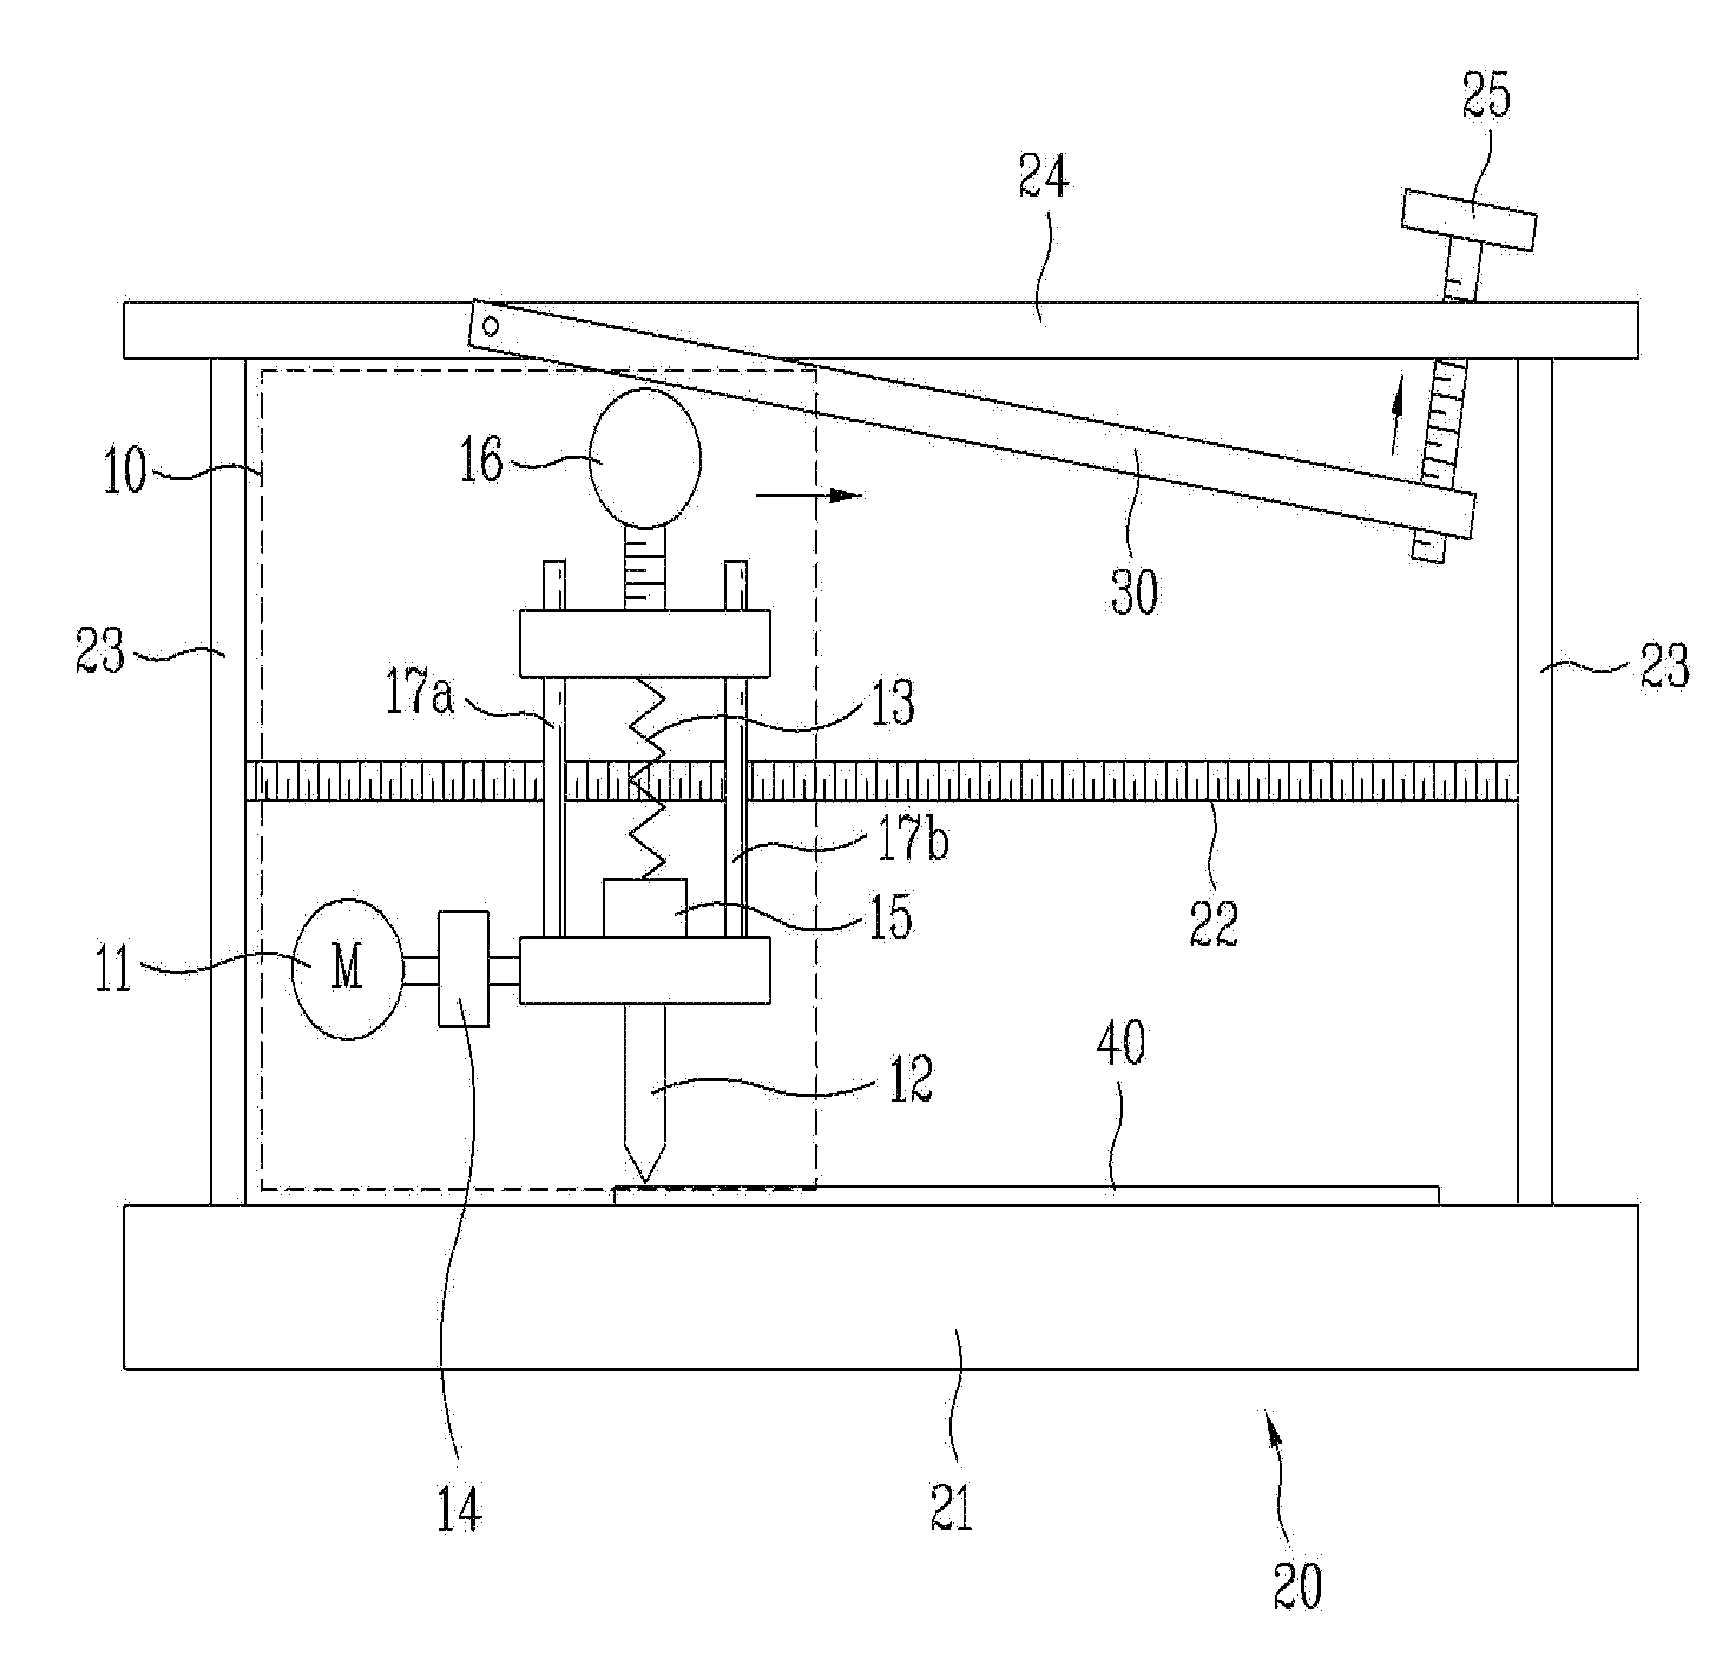 Scratch testing apparatus for performing scratching test while gradually increasing or decreasing load